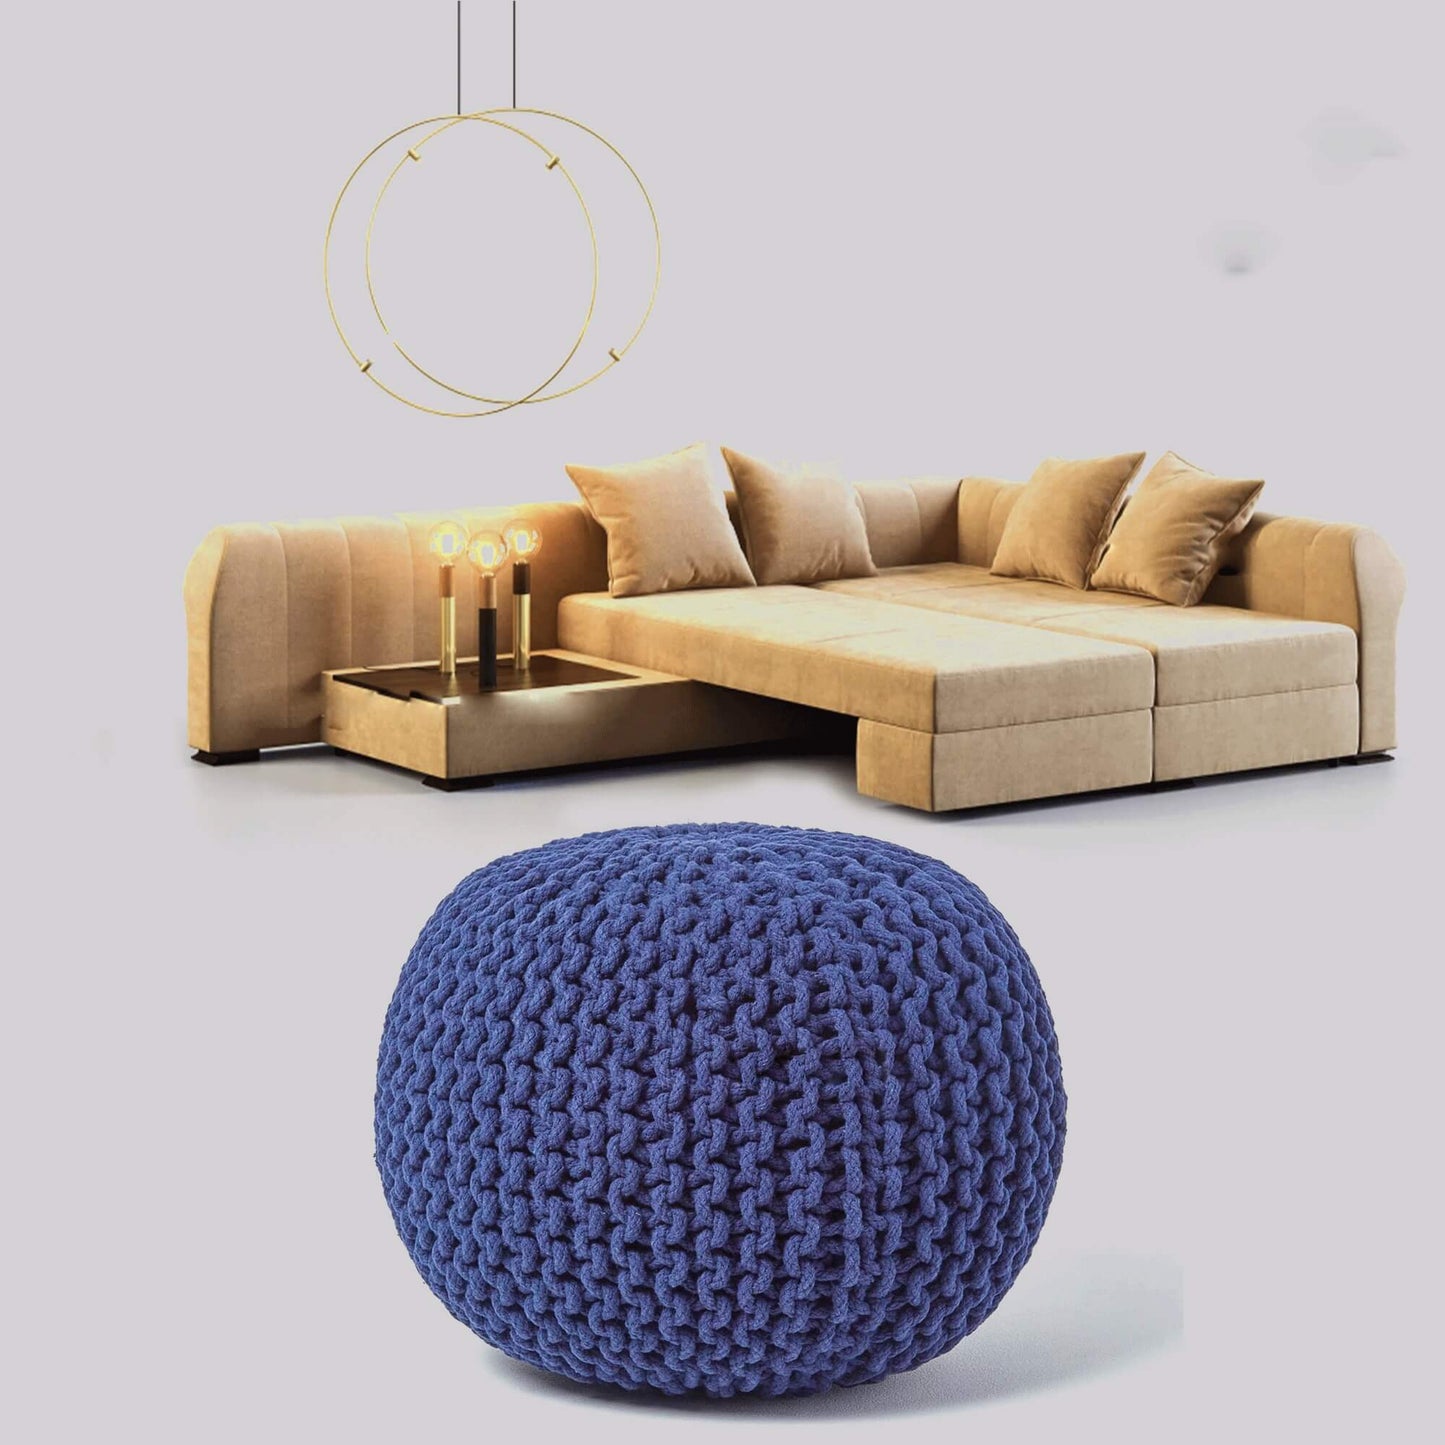 Knitted Pouffe & Footstool Round Large Moroccan Knitted 50CM - TheComfortshop.co.ukFurniture0721718971542thecomfortshopTheComfortshop.co.ukRoyal Blue Knitted PoufRoyal BlueKnitted Pouffe & Footstool Round Large Moroccan Knitted 50CM - TheComfortshop.co.uk